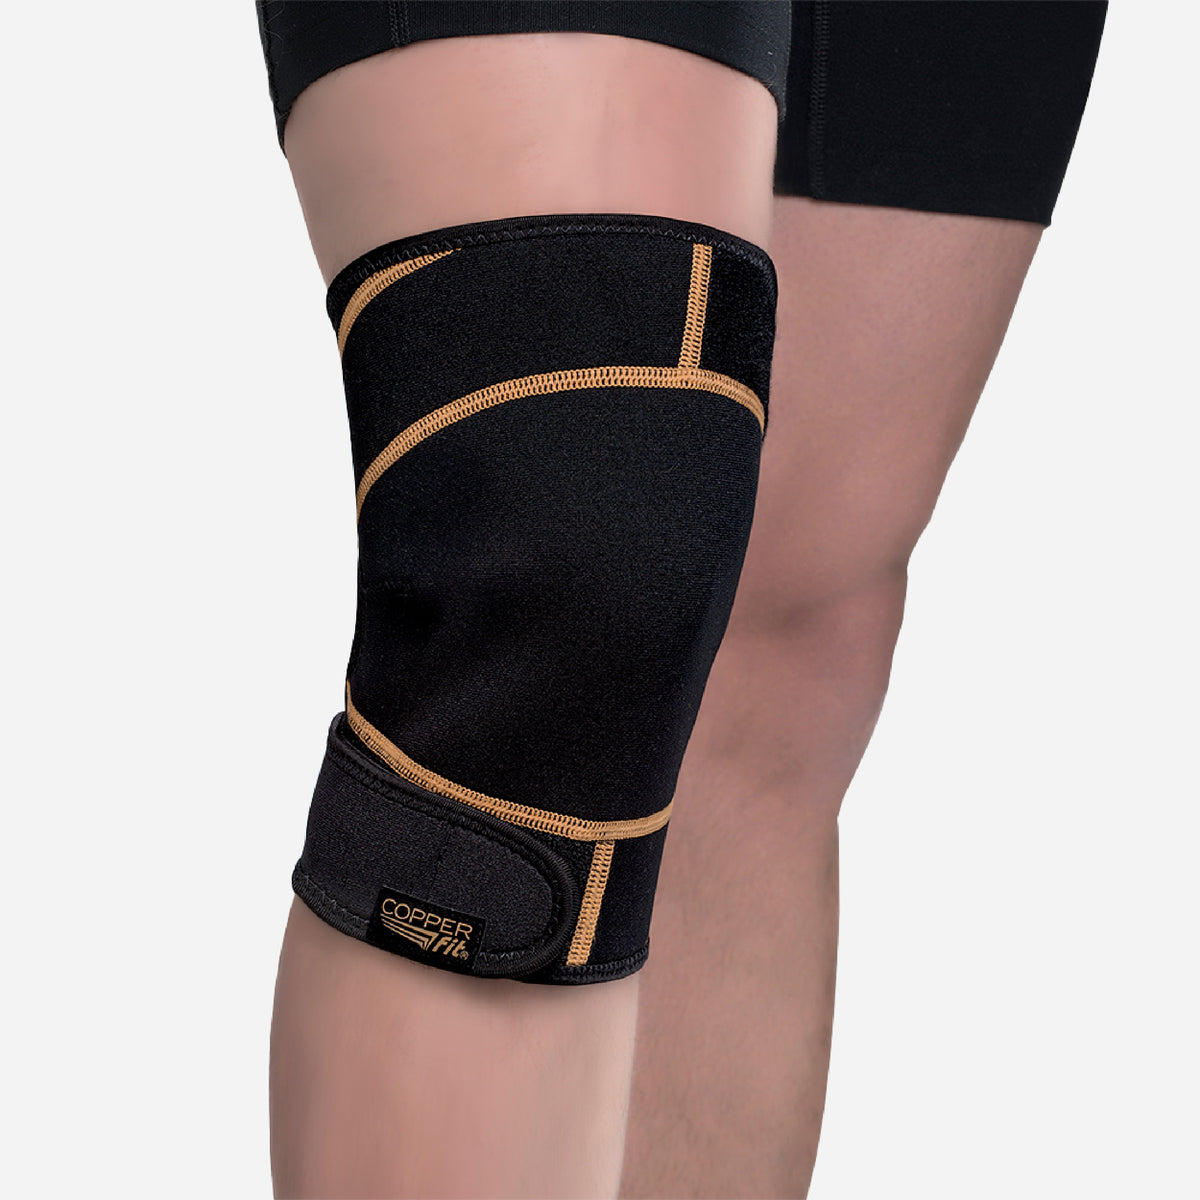 Rapid Relief Knee Wraps: Hot & Cold Therapy - Copper Fit